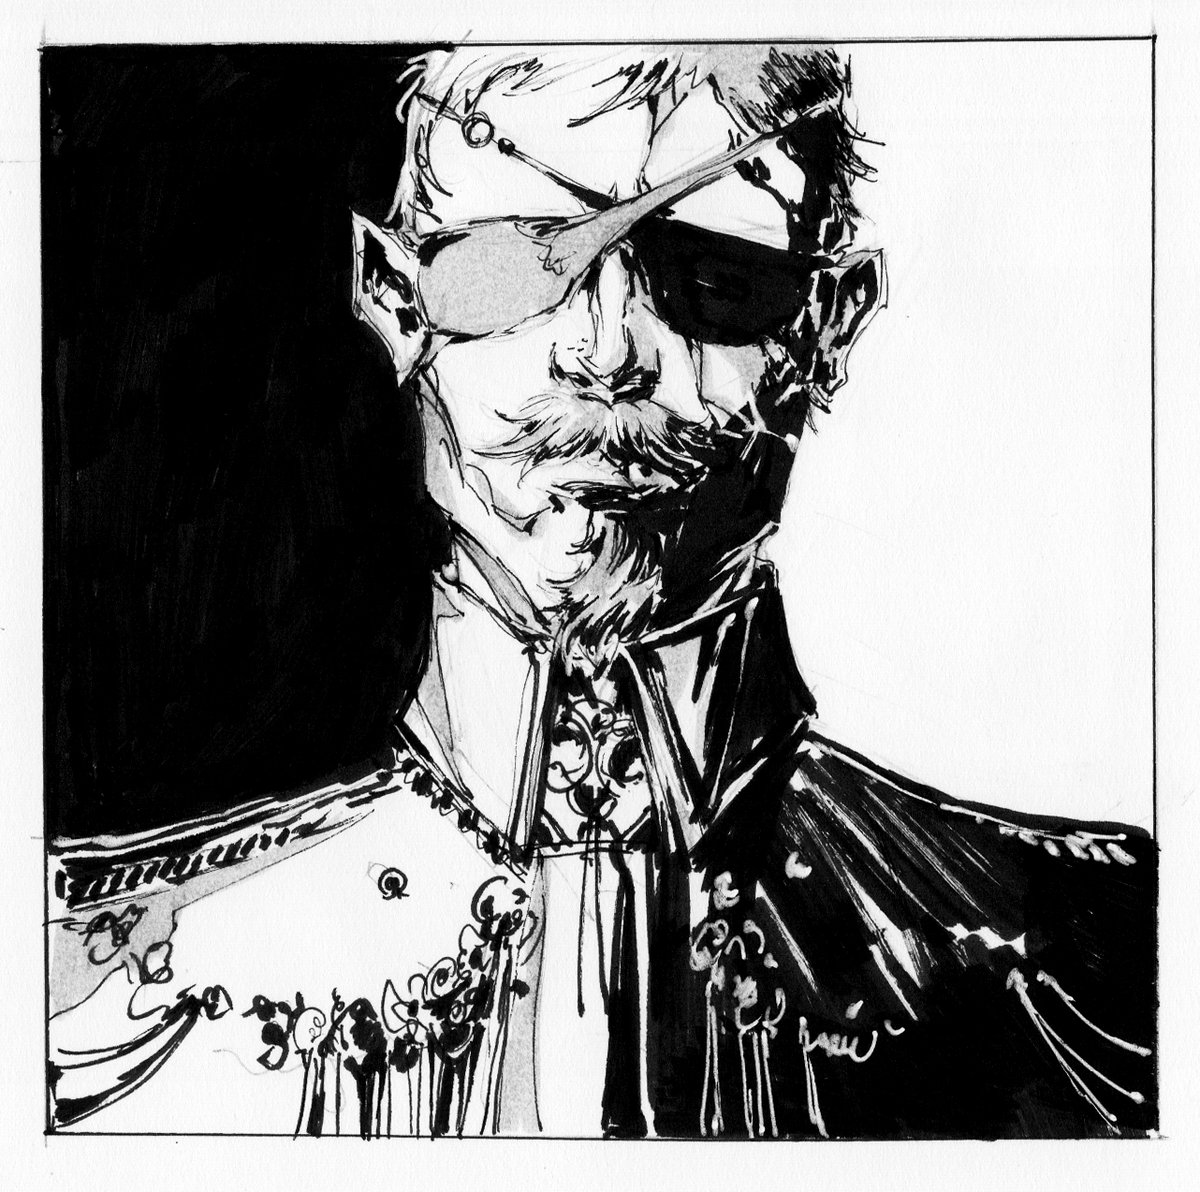 Nez again! As a completion of yesterday's post, I also do a lot of varied ink art! #VisibleWomen 

?https://t.co/mZzVNrK1tx
?https://t.co/2N2EOQBDf7 